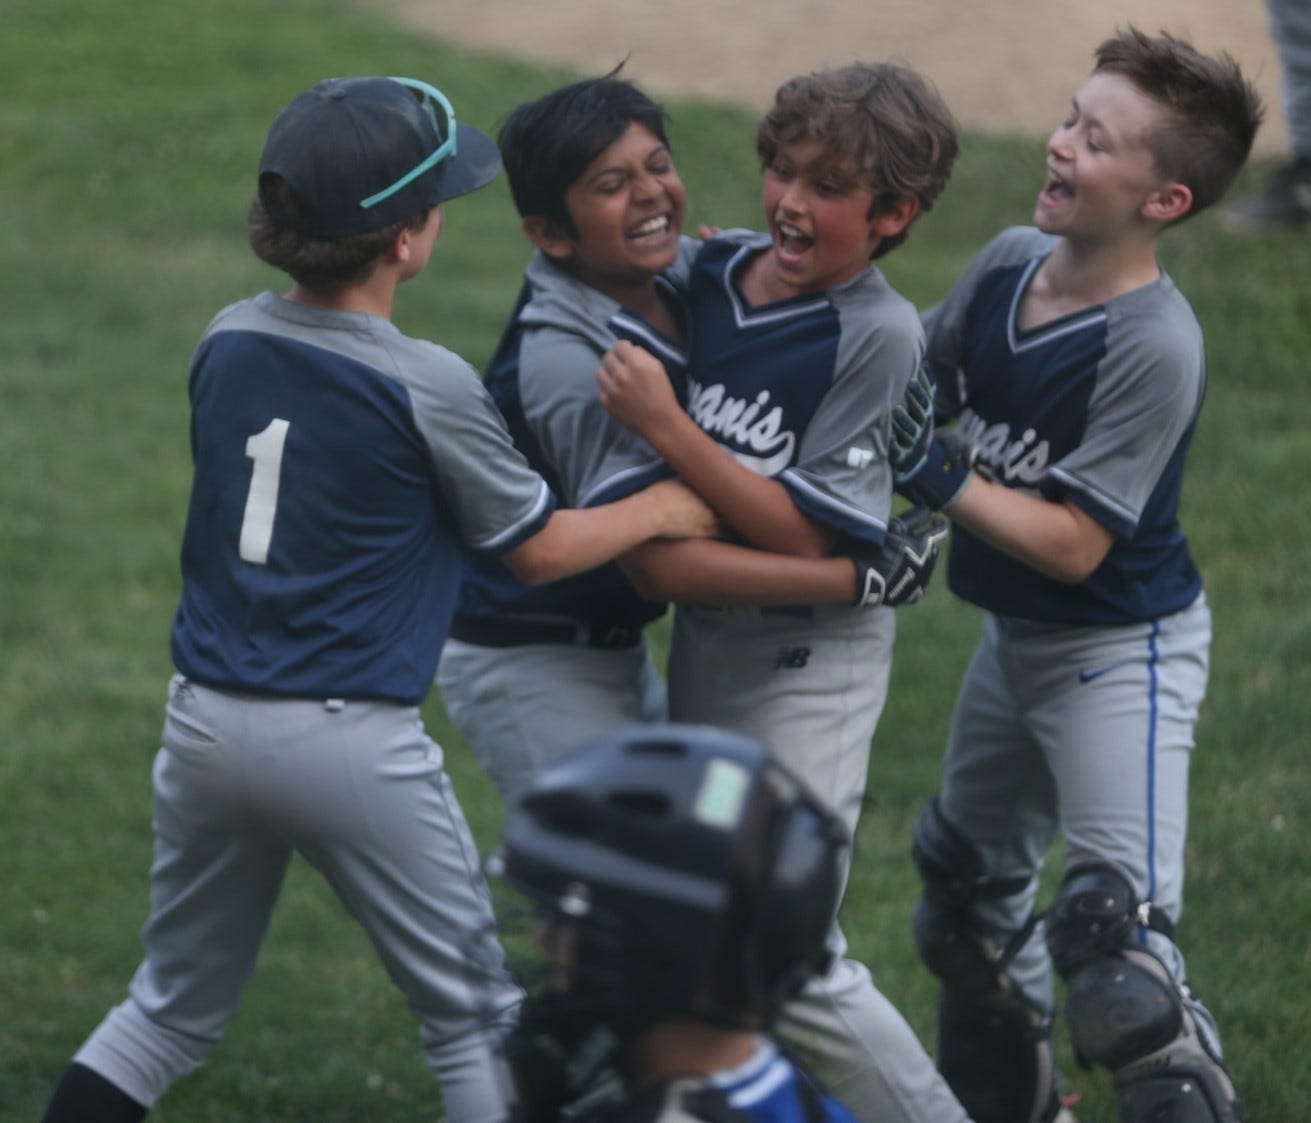 Kiwanis walks off with Portsmouth Little League Hislop title thanks to Nirbhuvane's hit